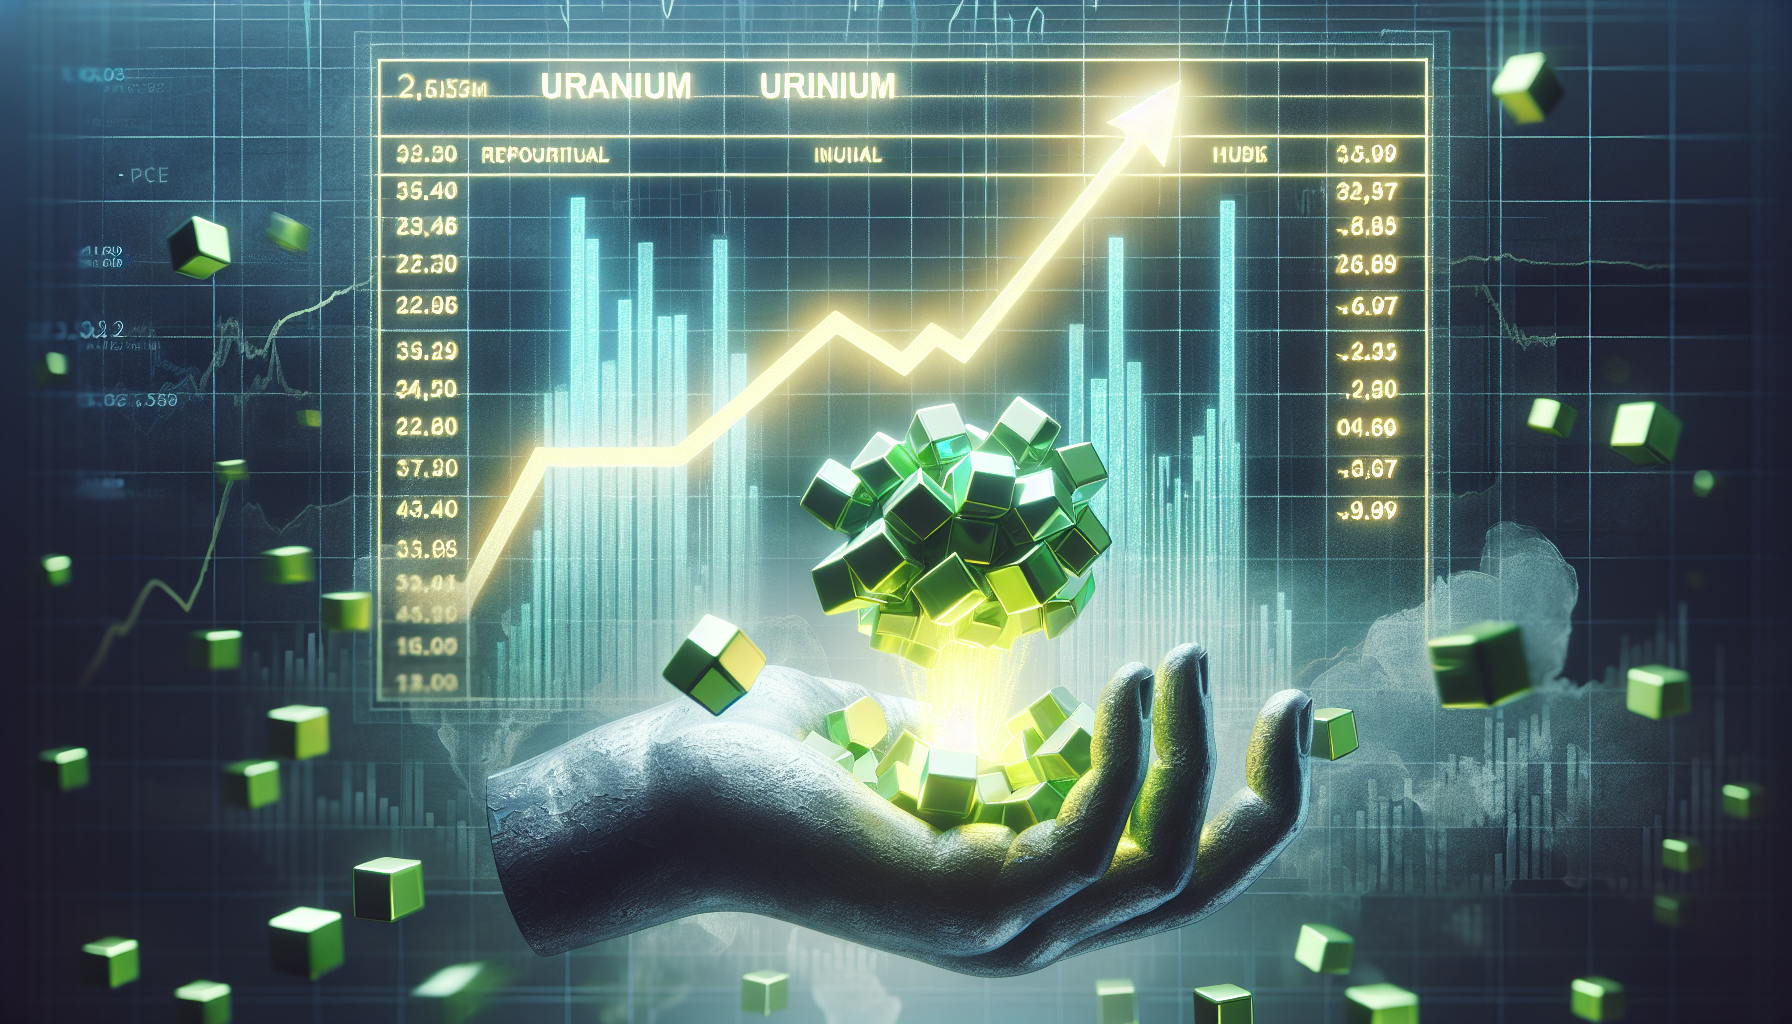 A stock ticker displaying uranium prices skyrocketing upwards, surrounded by glowing green uranium cubes.